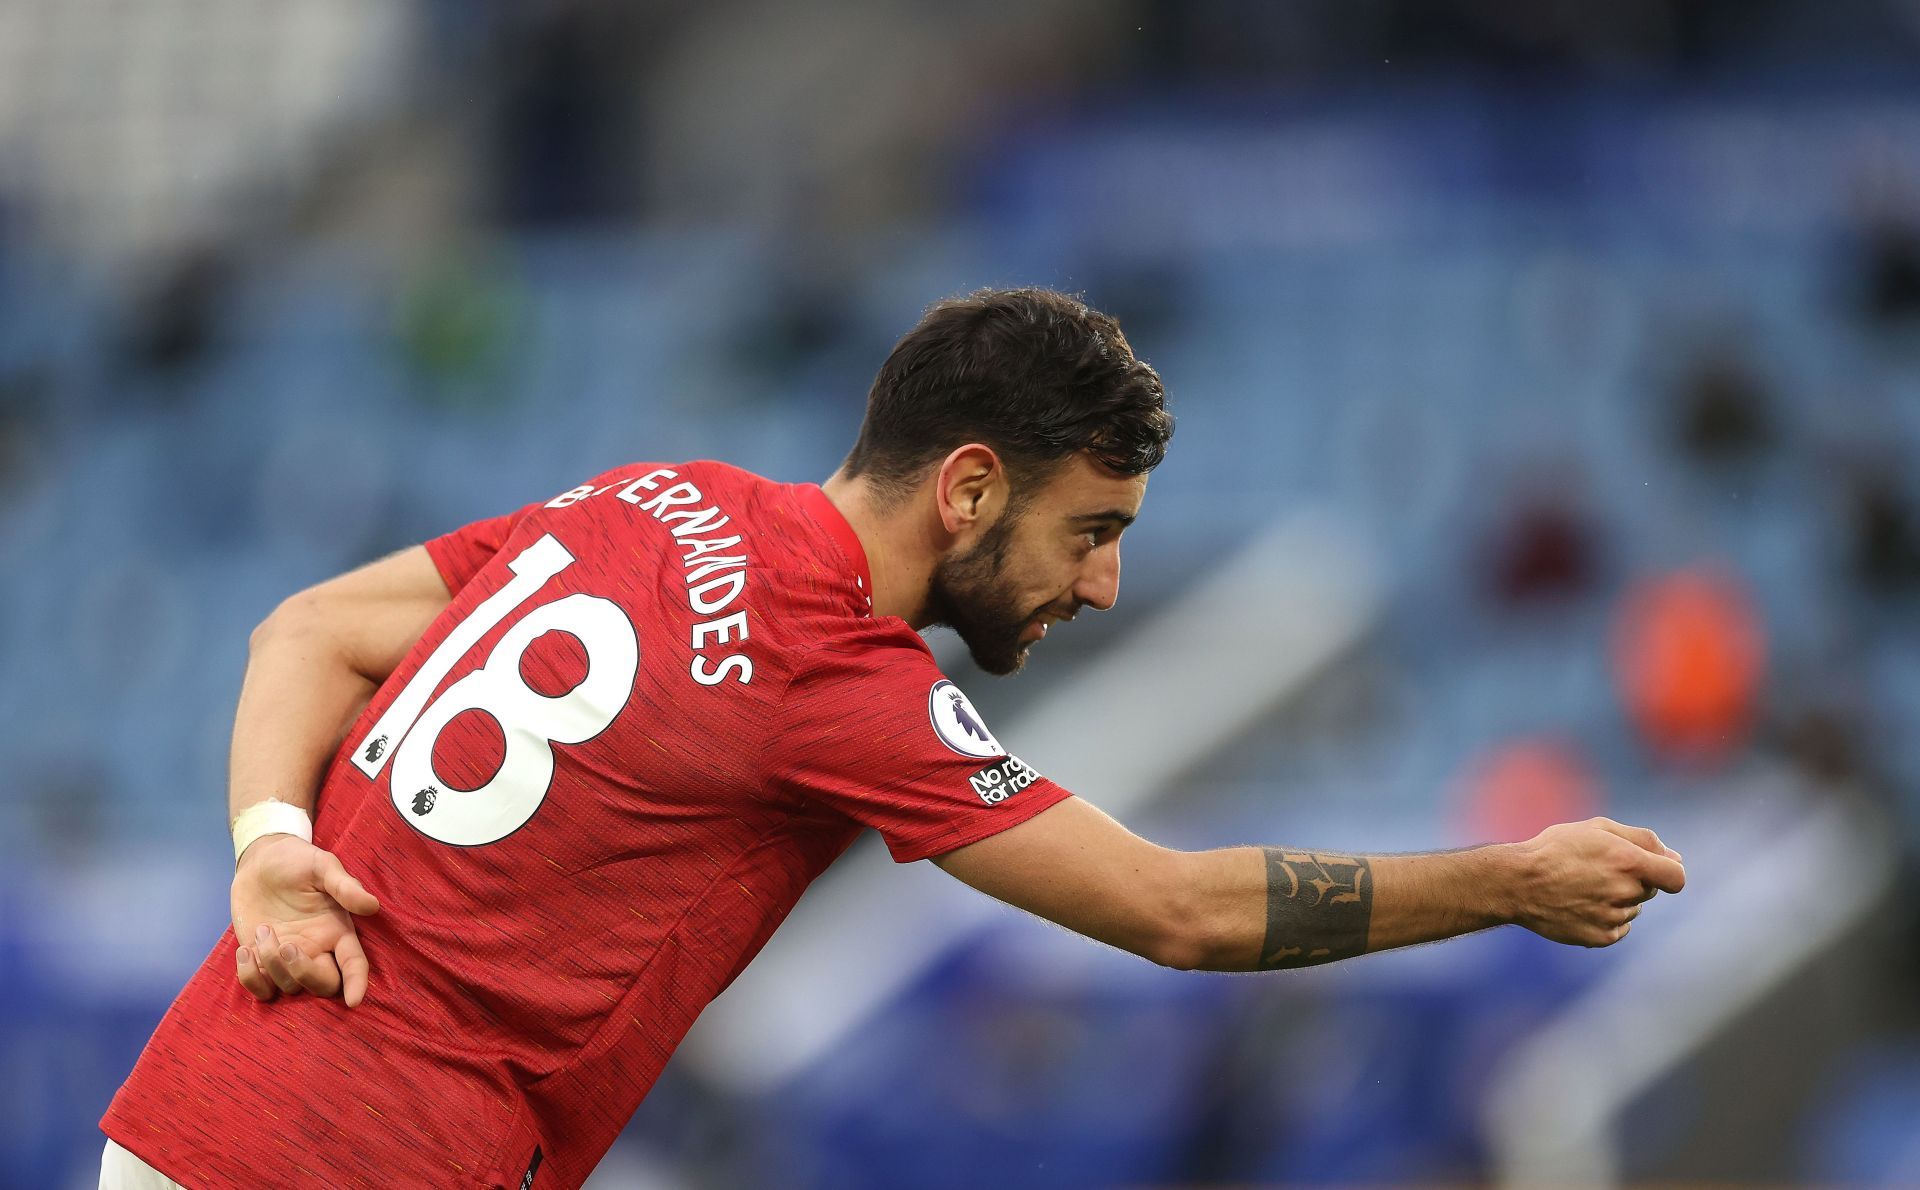 Bruno Fernandes has been a solid performer for United